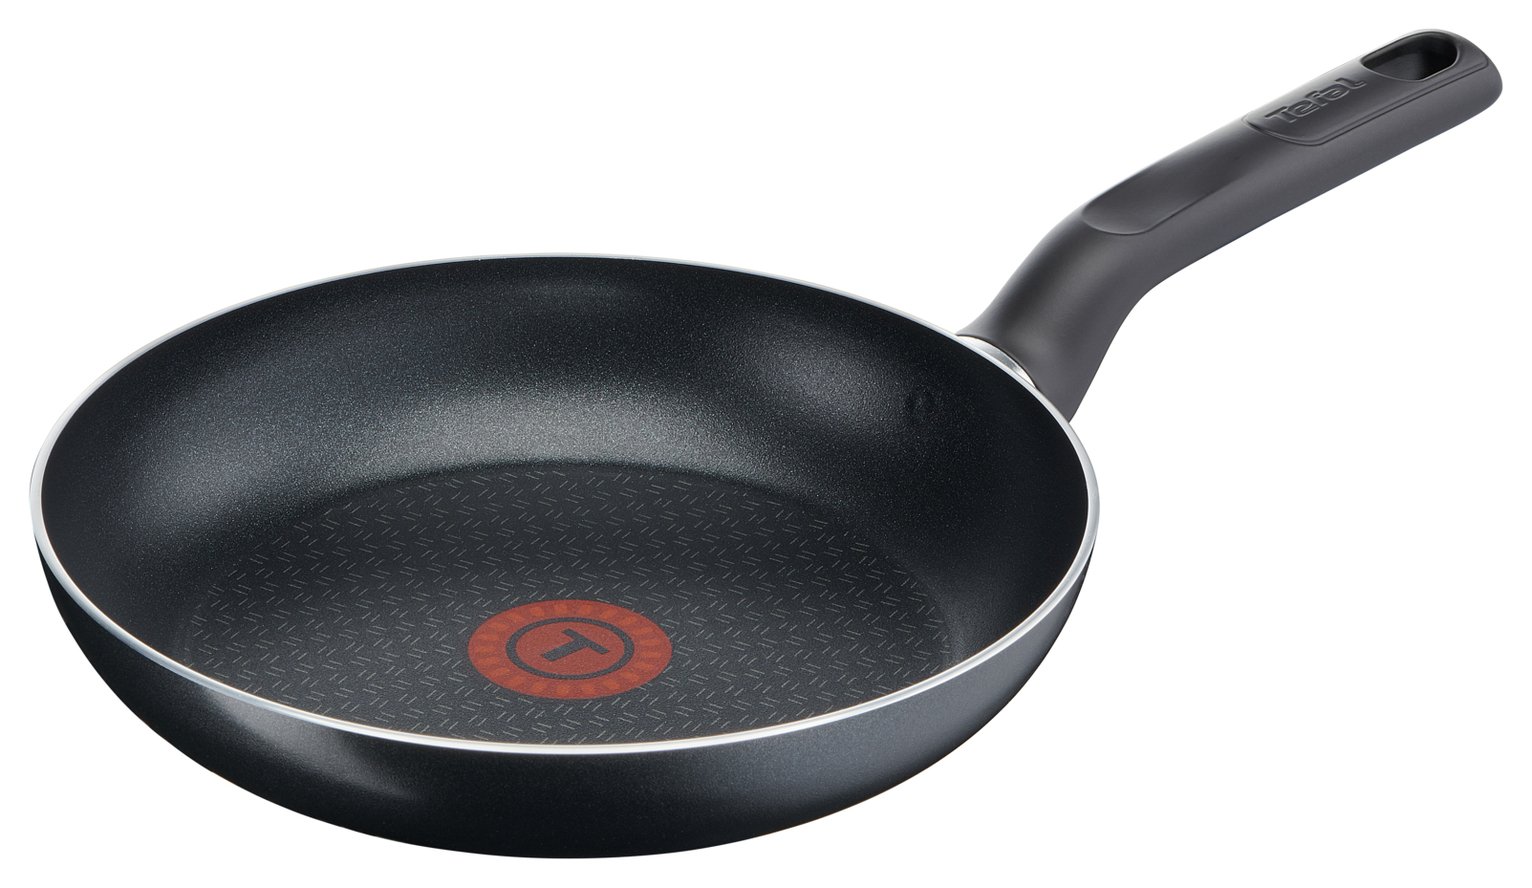 Tefal Superior Cook 20cm Non Stick Frying Pan Reviews Updated January